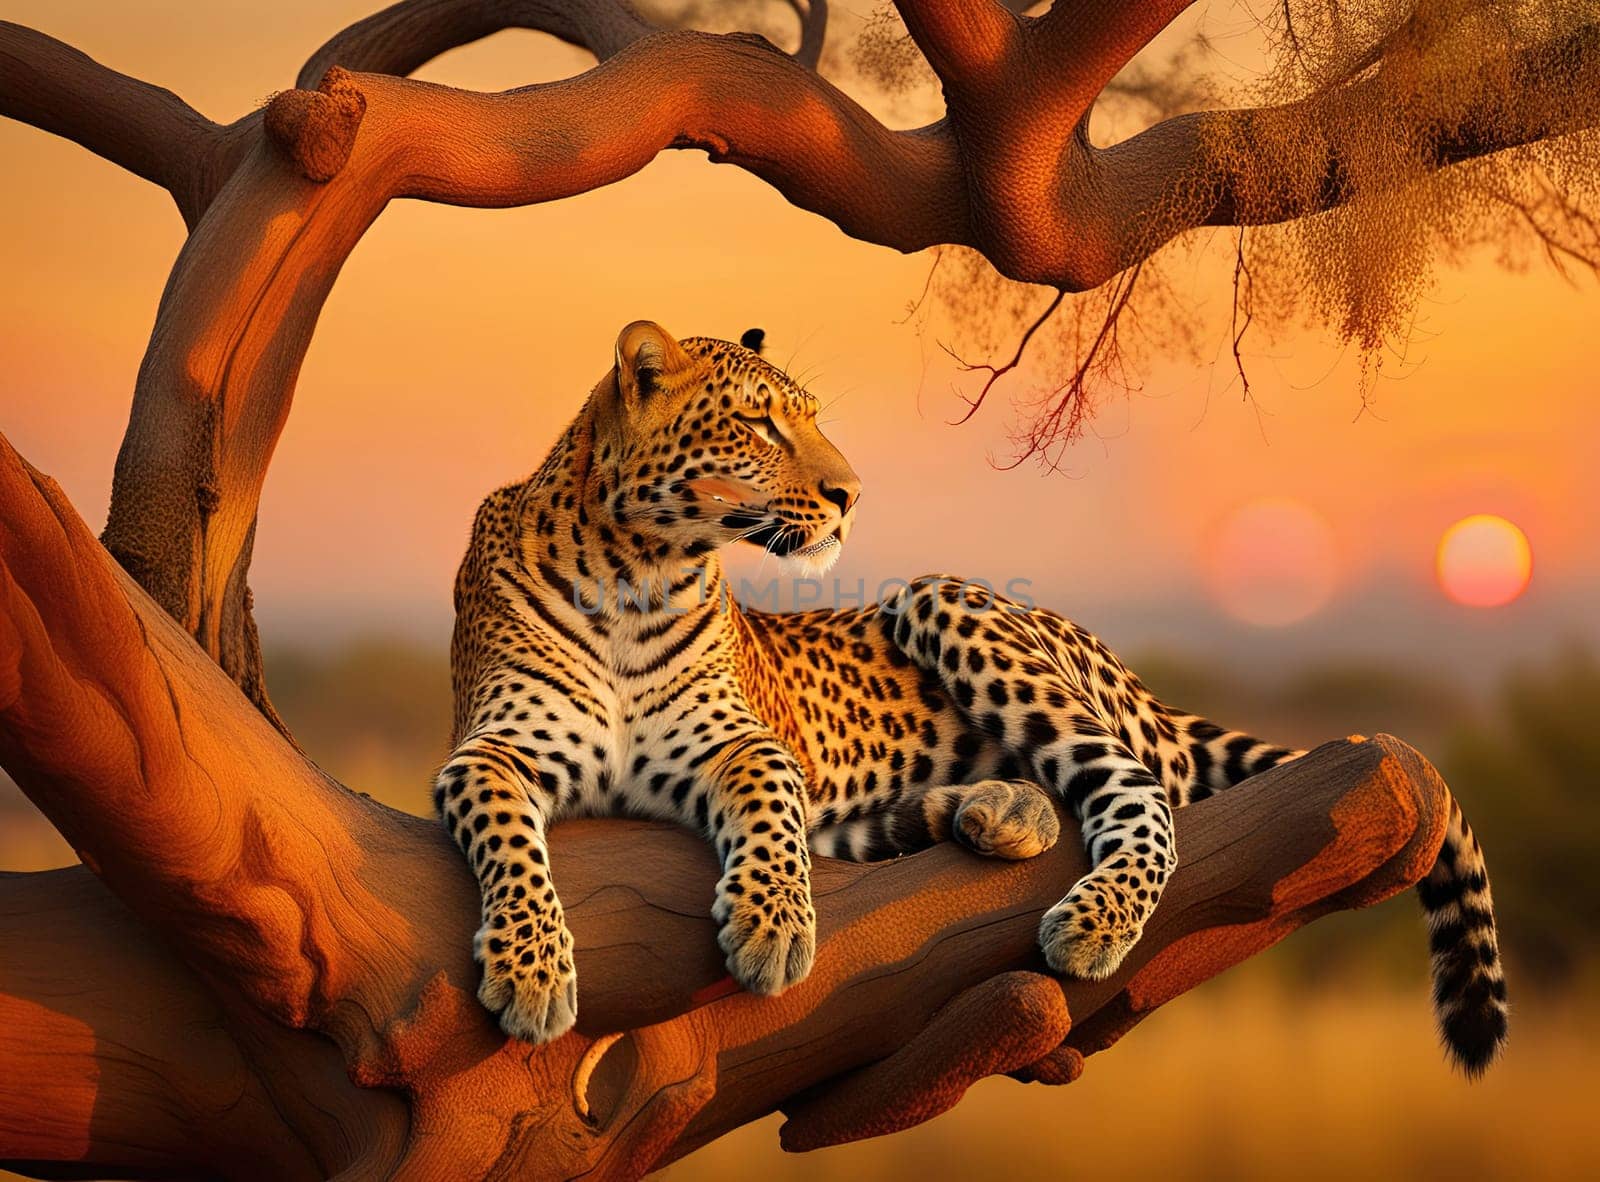 Leopard resting on a tree branch at sunset in the African savannah.Leopard sitting on a tree branch at sunset. Leopard lying on a tree branch in the sunset light. Animal portrait.Leopard sitting on a tree trunk at sunset. African wildlife.